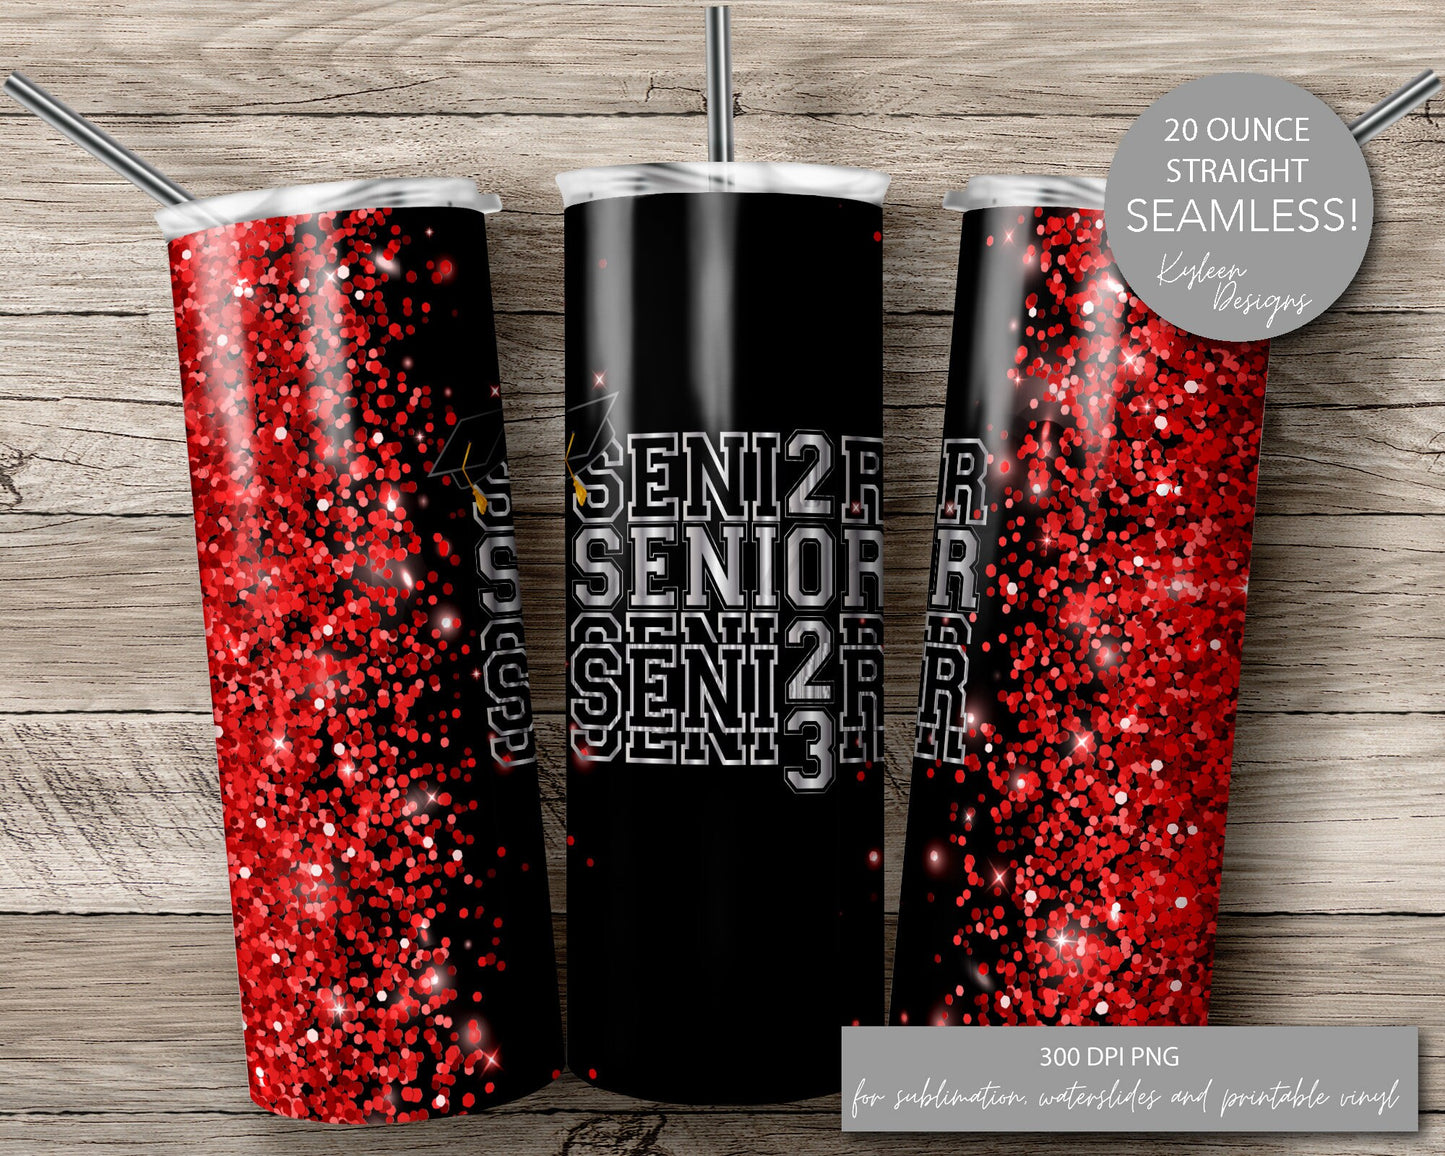 SEAMLESS 20 ounce straight Senior 2023 tumbler wrap for sublimation, waterslide High res PNG digital file- Straight only